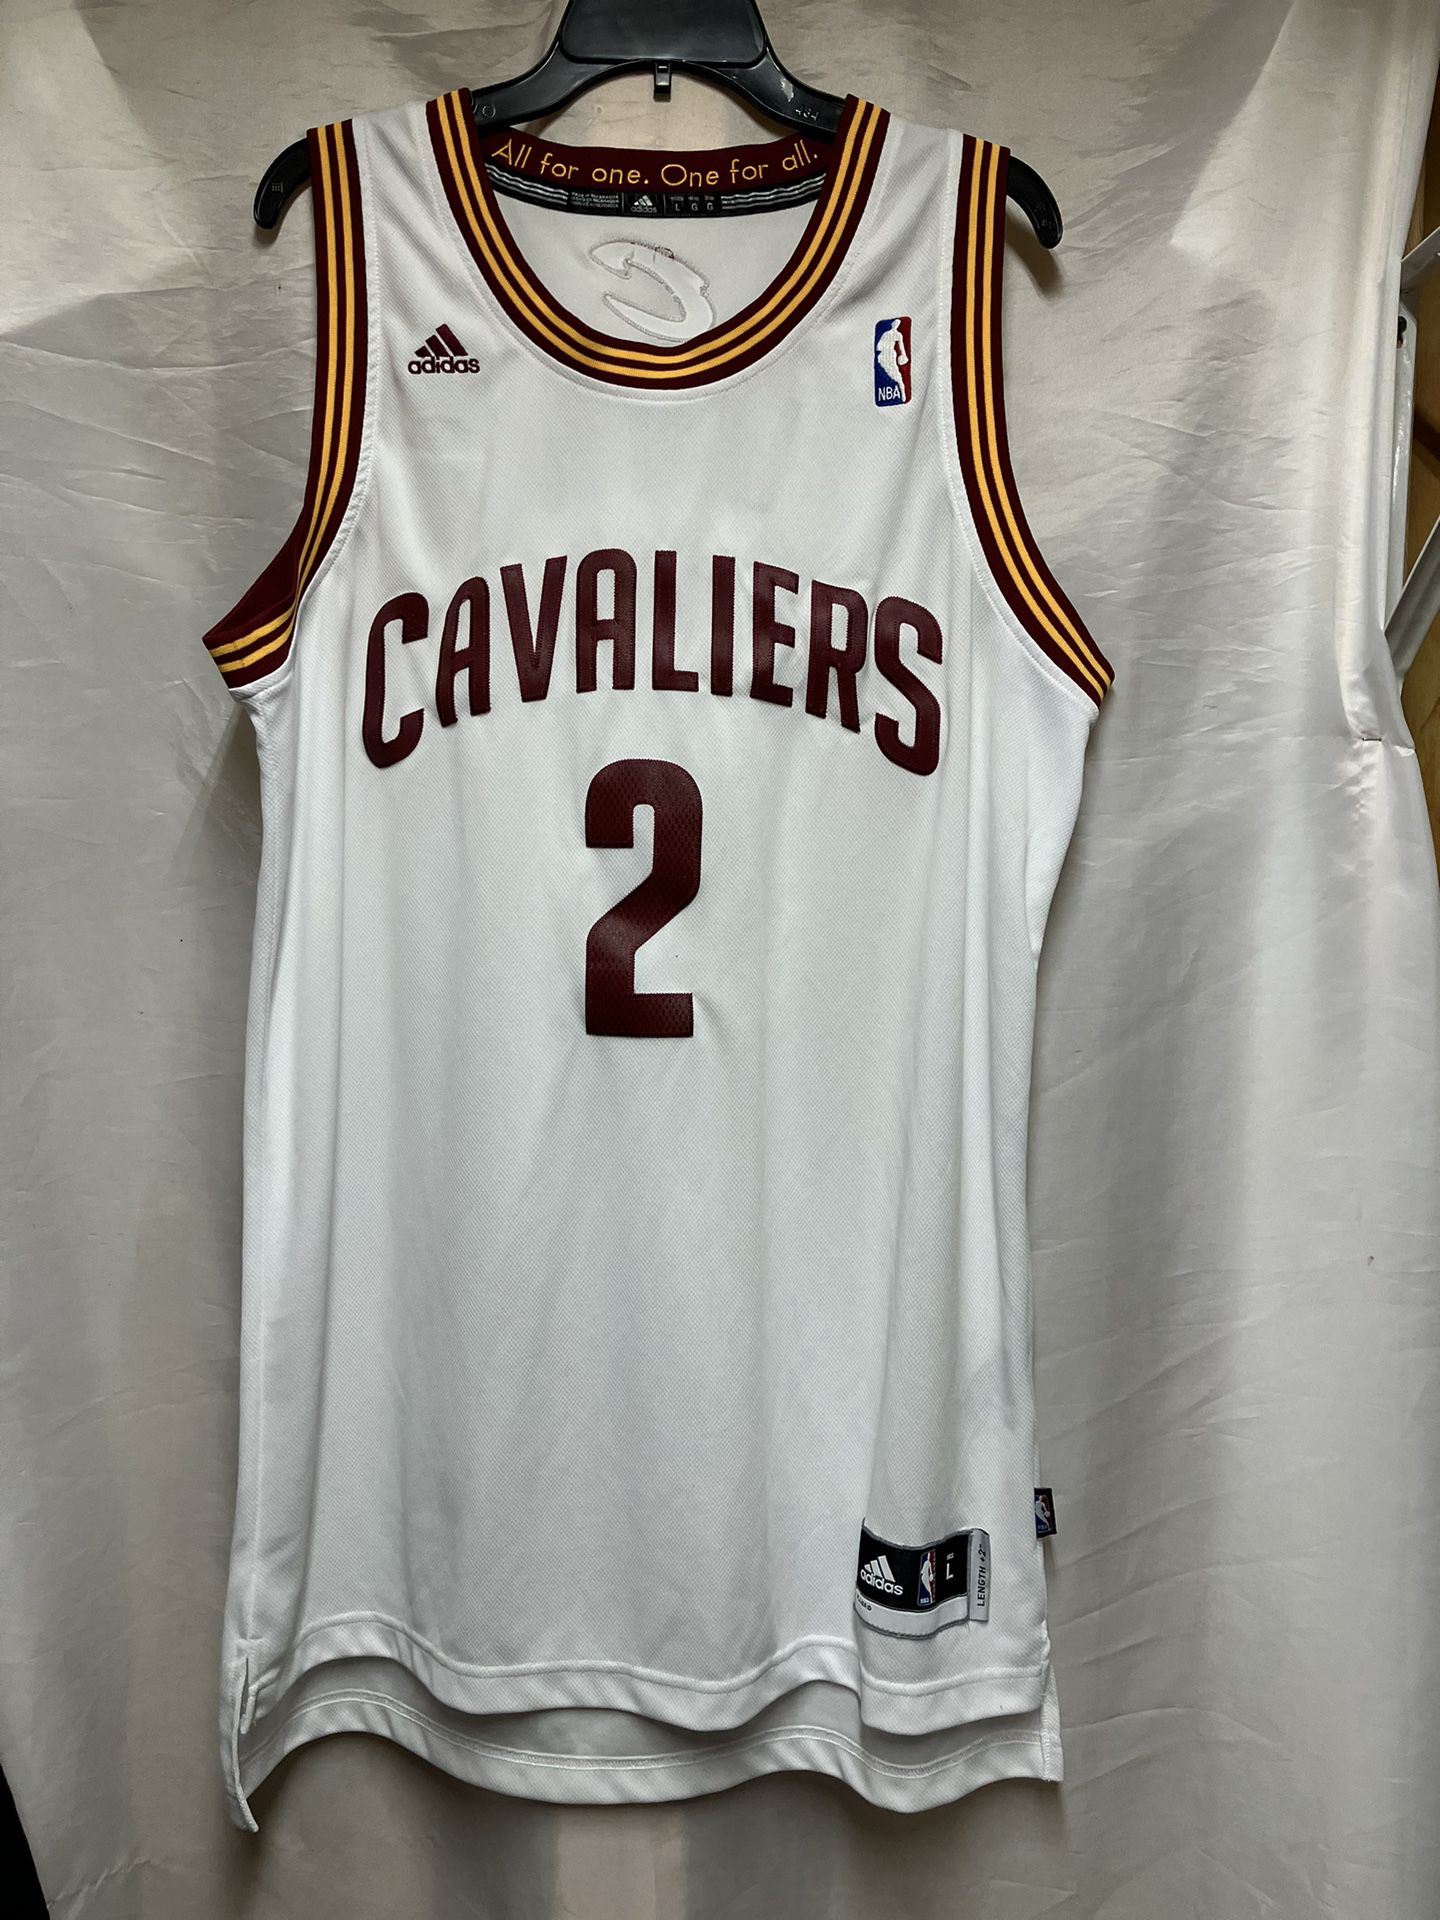 Cleveland Cavaliers Cavs KYRIE IRVING Adidas NBA Jersey Size XL 